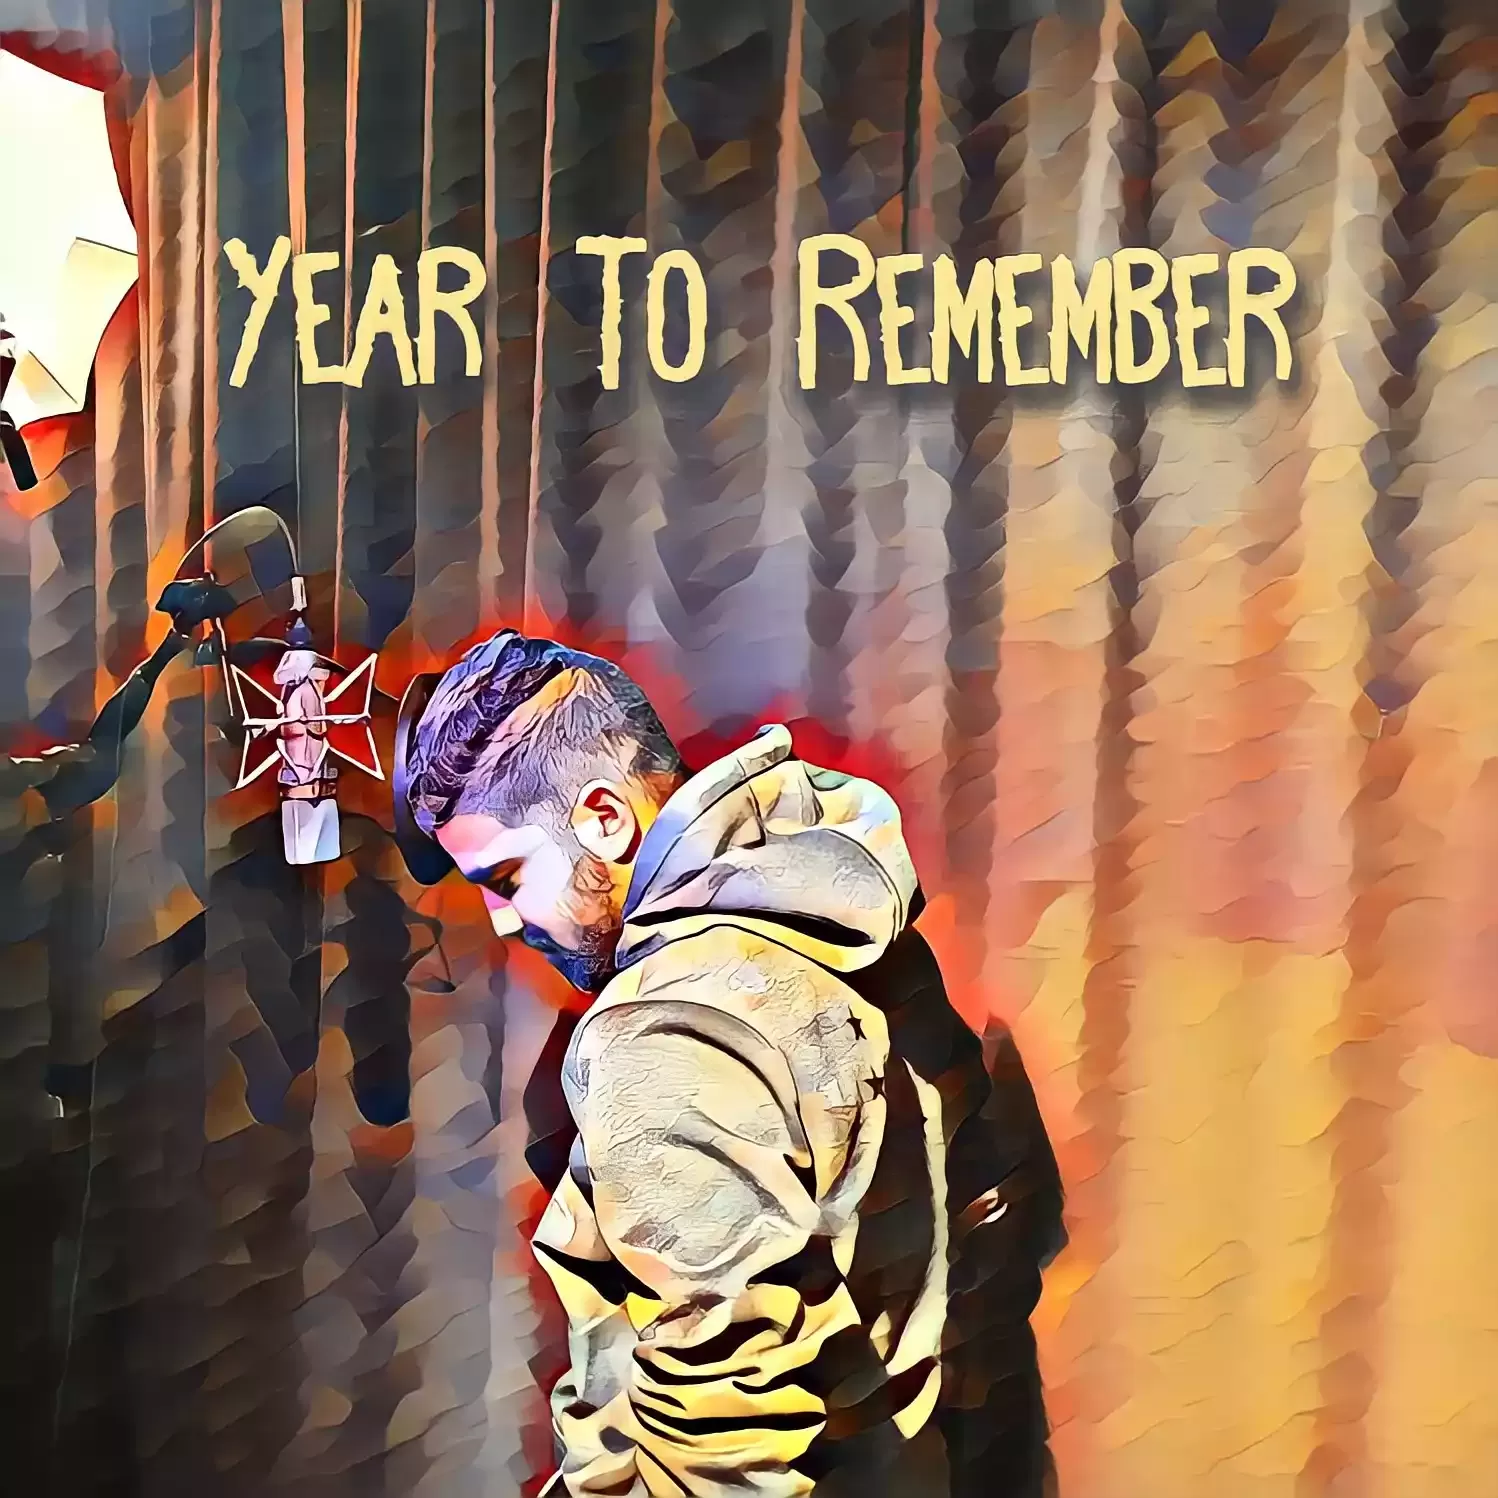 Draconic Announces 'Year To Remember', A Debut Album Released on 2022